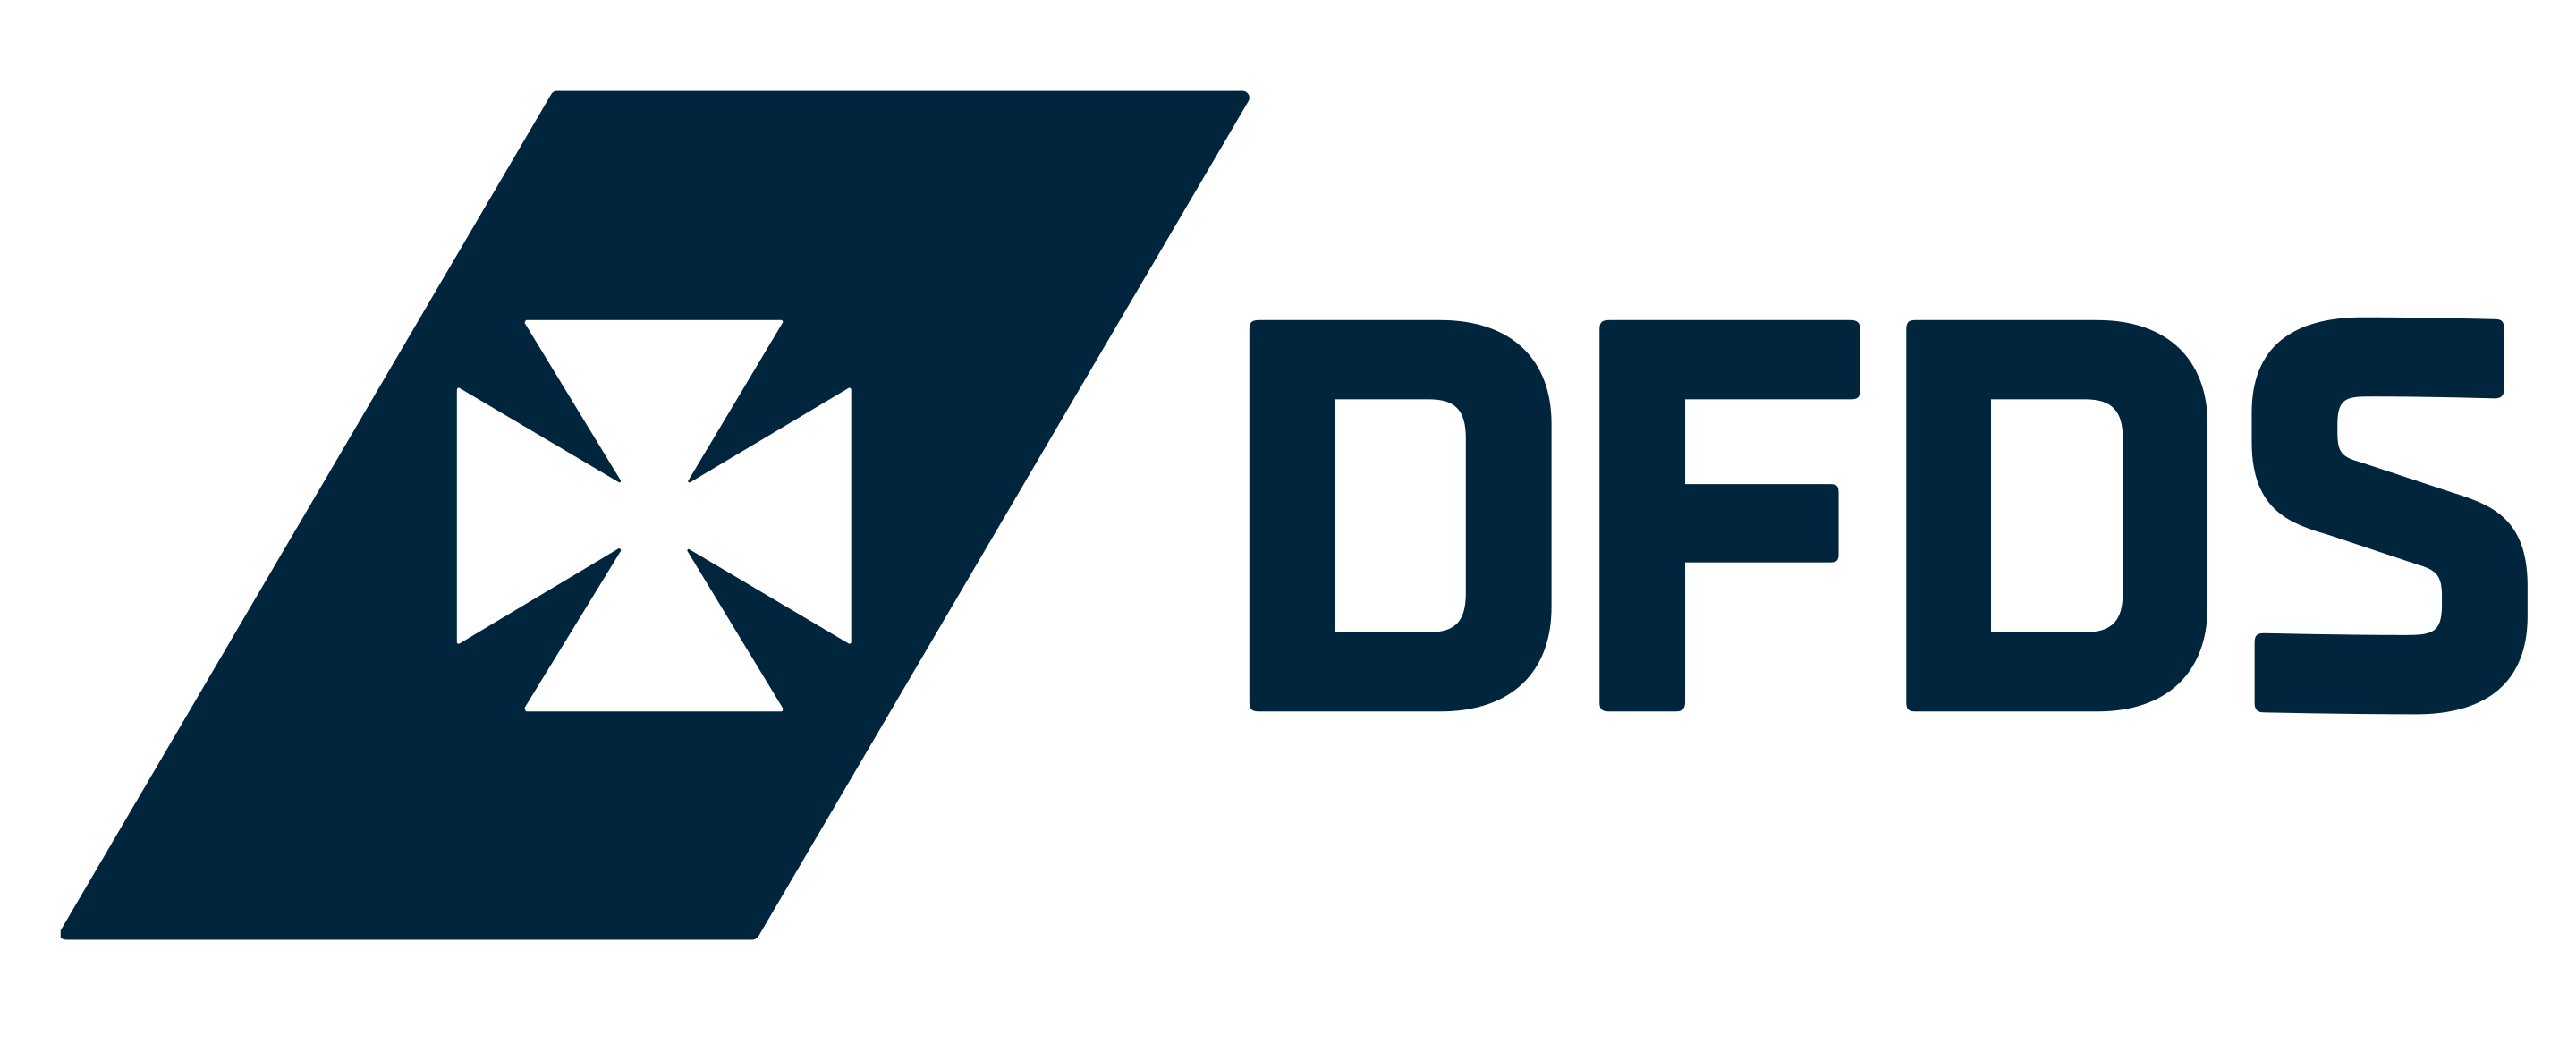 DFDSのロゴ